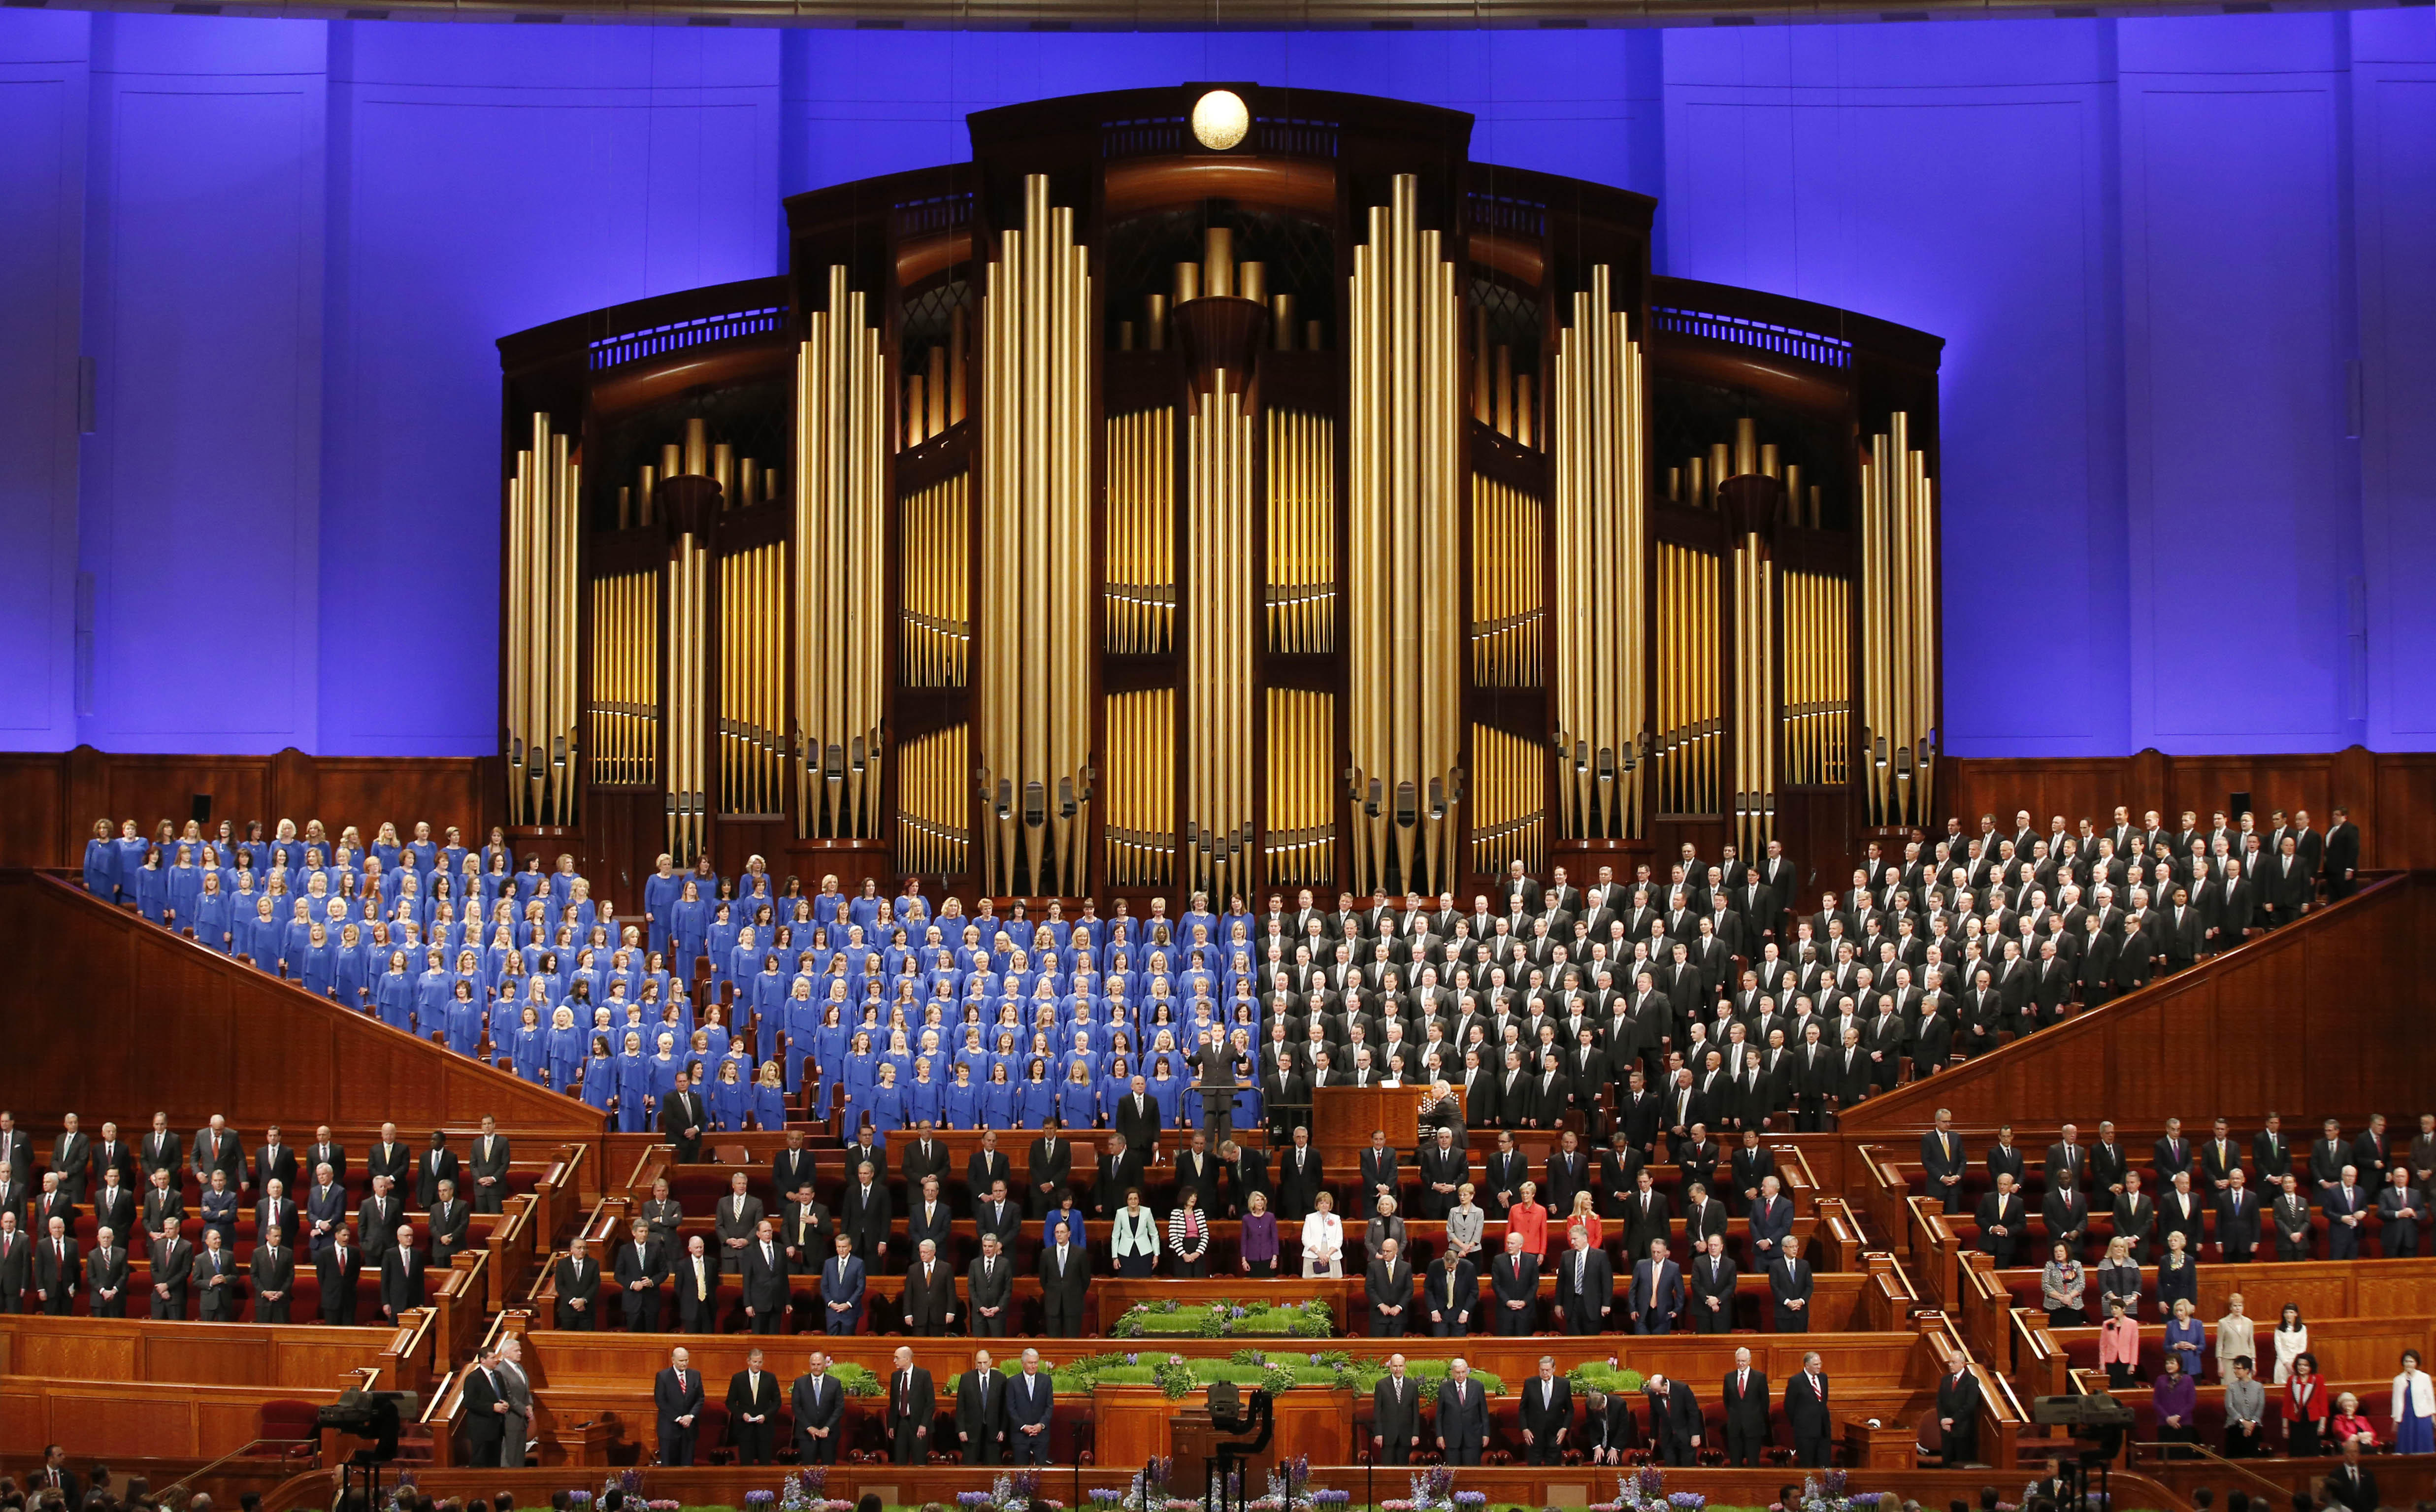 Mormon Tabernacle Choir singer quits over Donald Trump inauguration